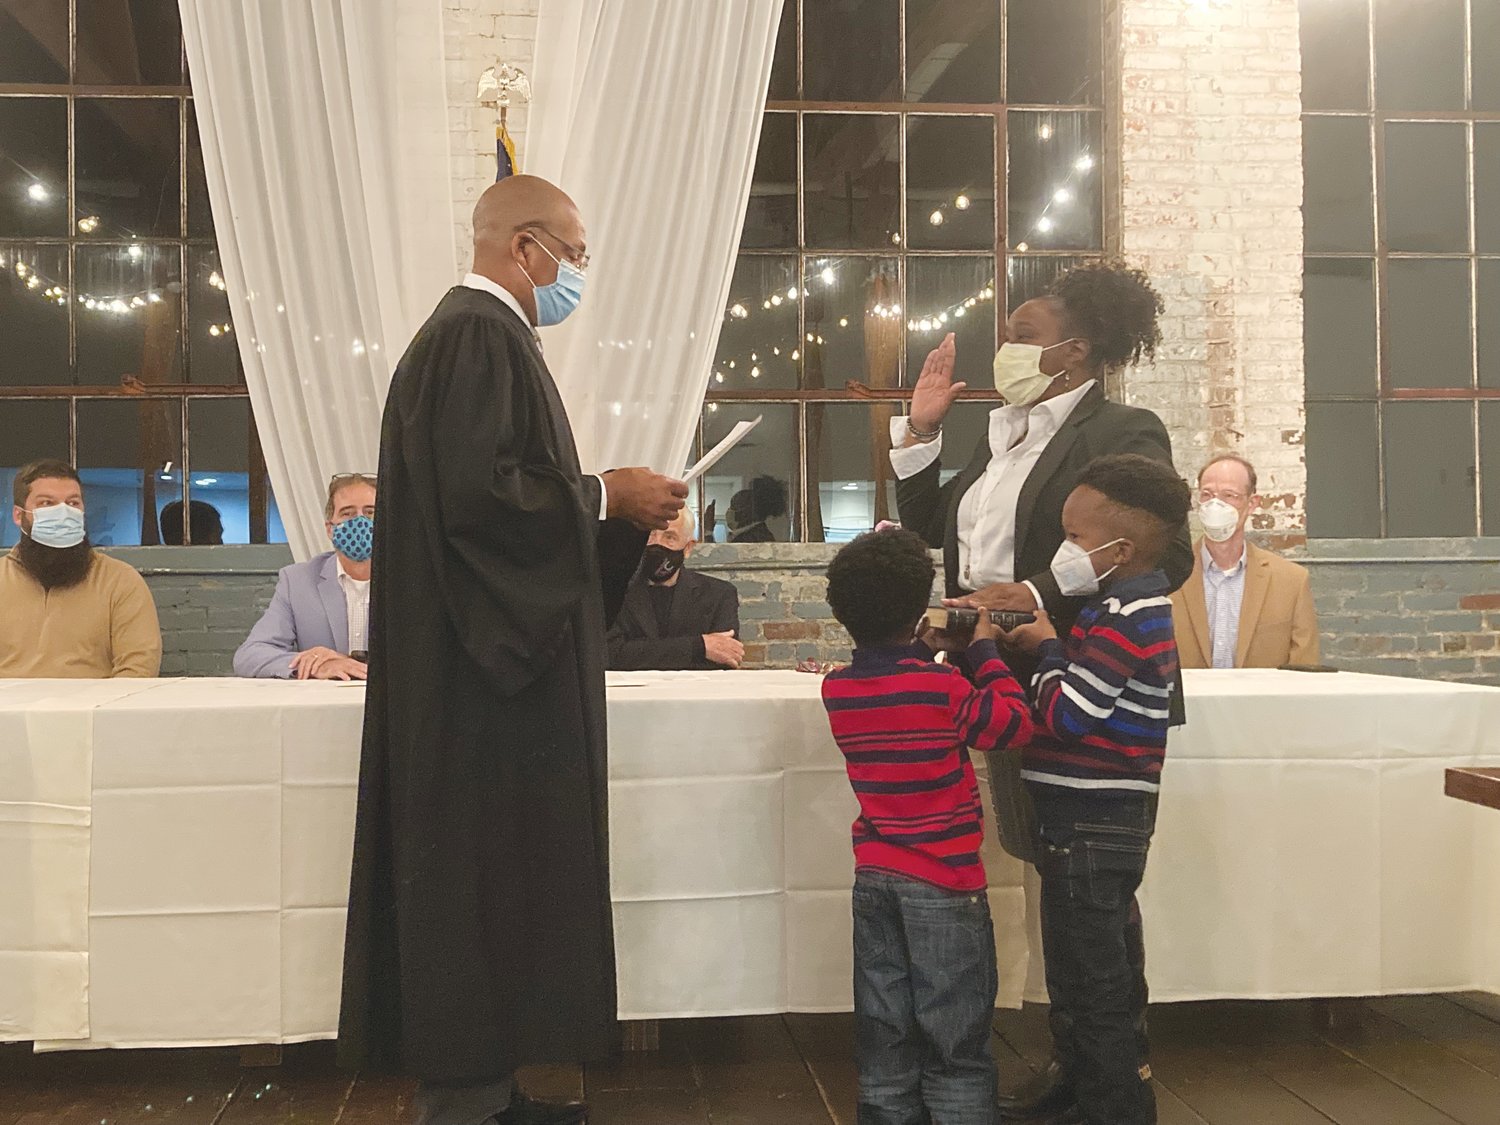 Pittsboro Commissioner and Mayor Pro Tem Pamela Baldwin was sworn into her fifth term on Monday by Judge Carl R. Fox.